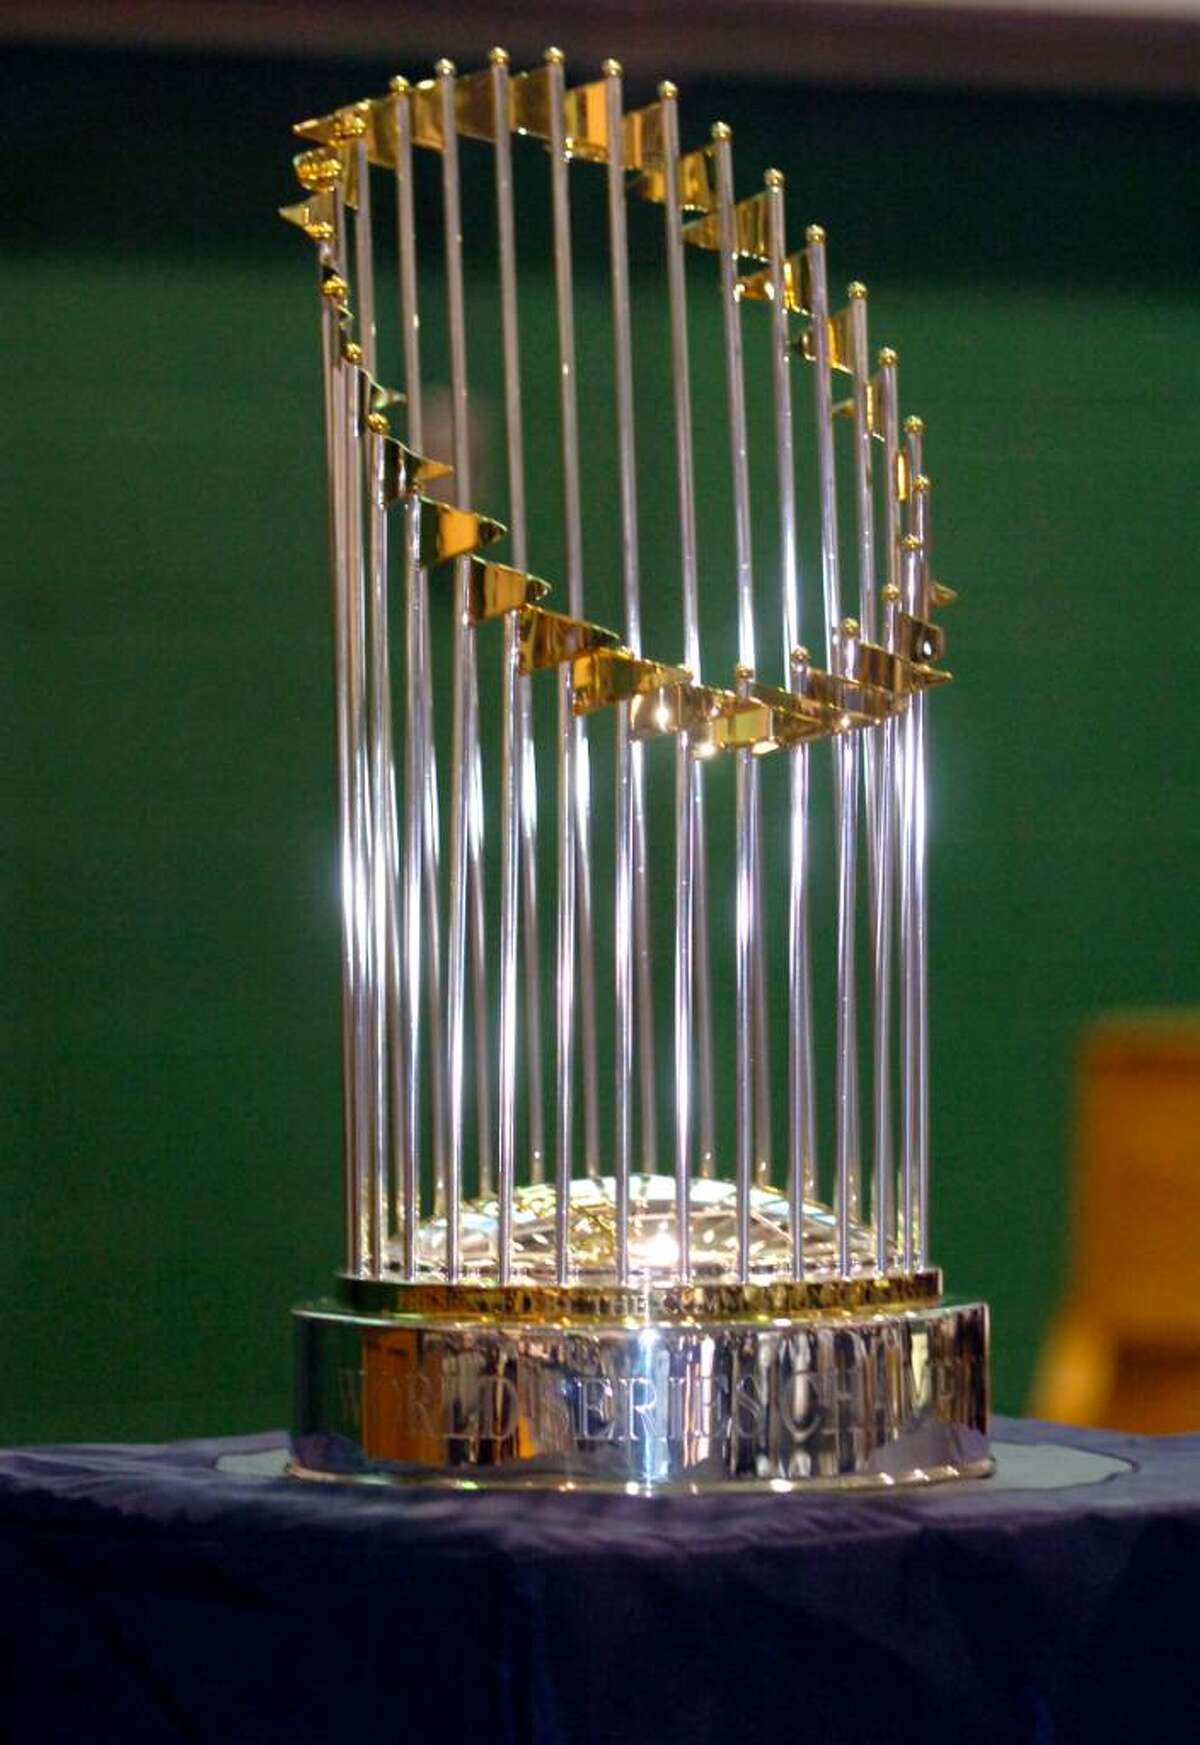 .The New York Yankees' 2009 World Series trophy on display at the Convent of the Sacred Heart during their celebration of the Yankees championship, on January 26, 2010